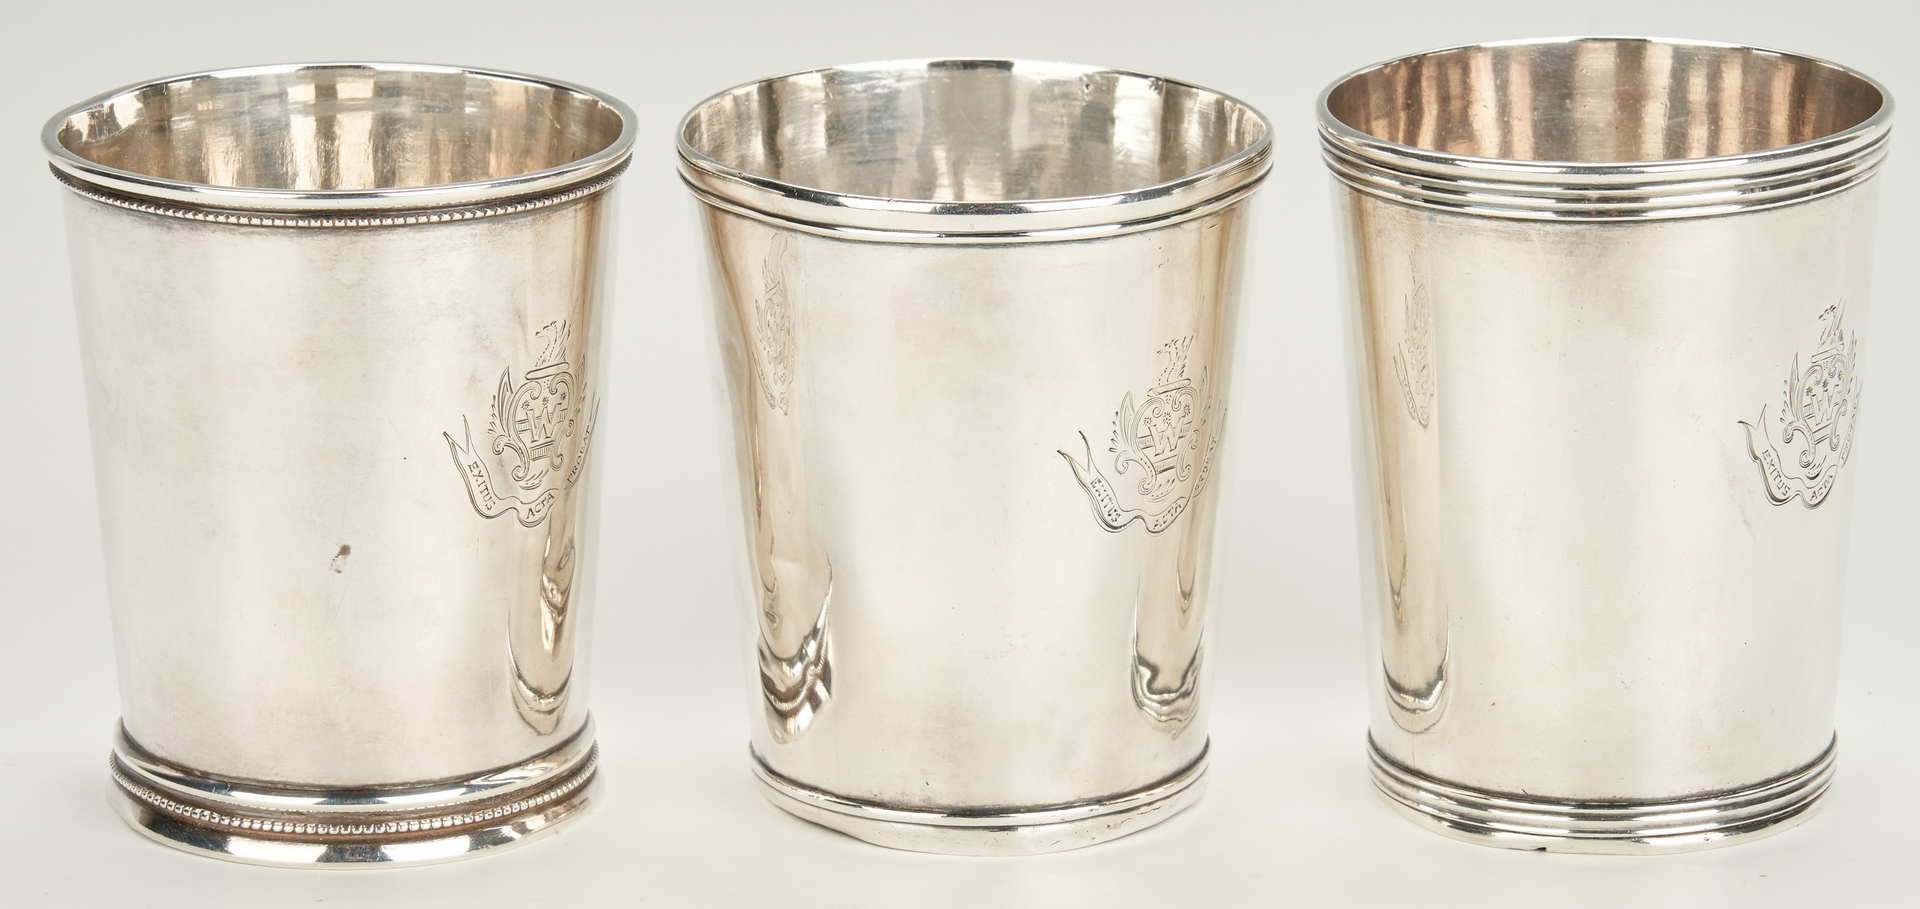 Lot 71: 3 Coin Silver Mint Julep Cups, Washington Family Crest